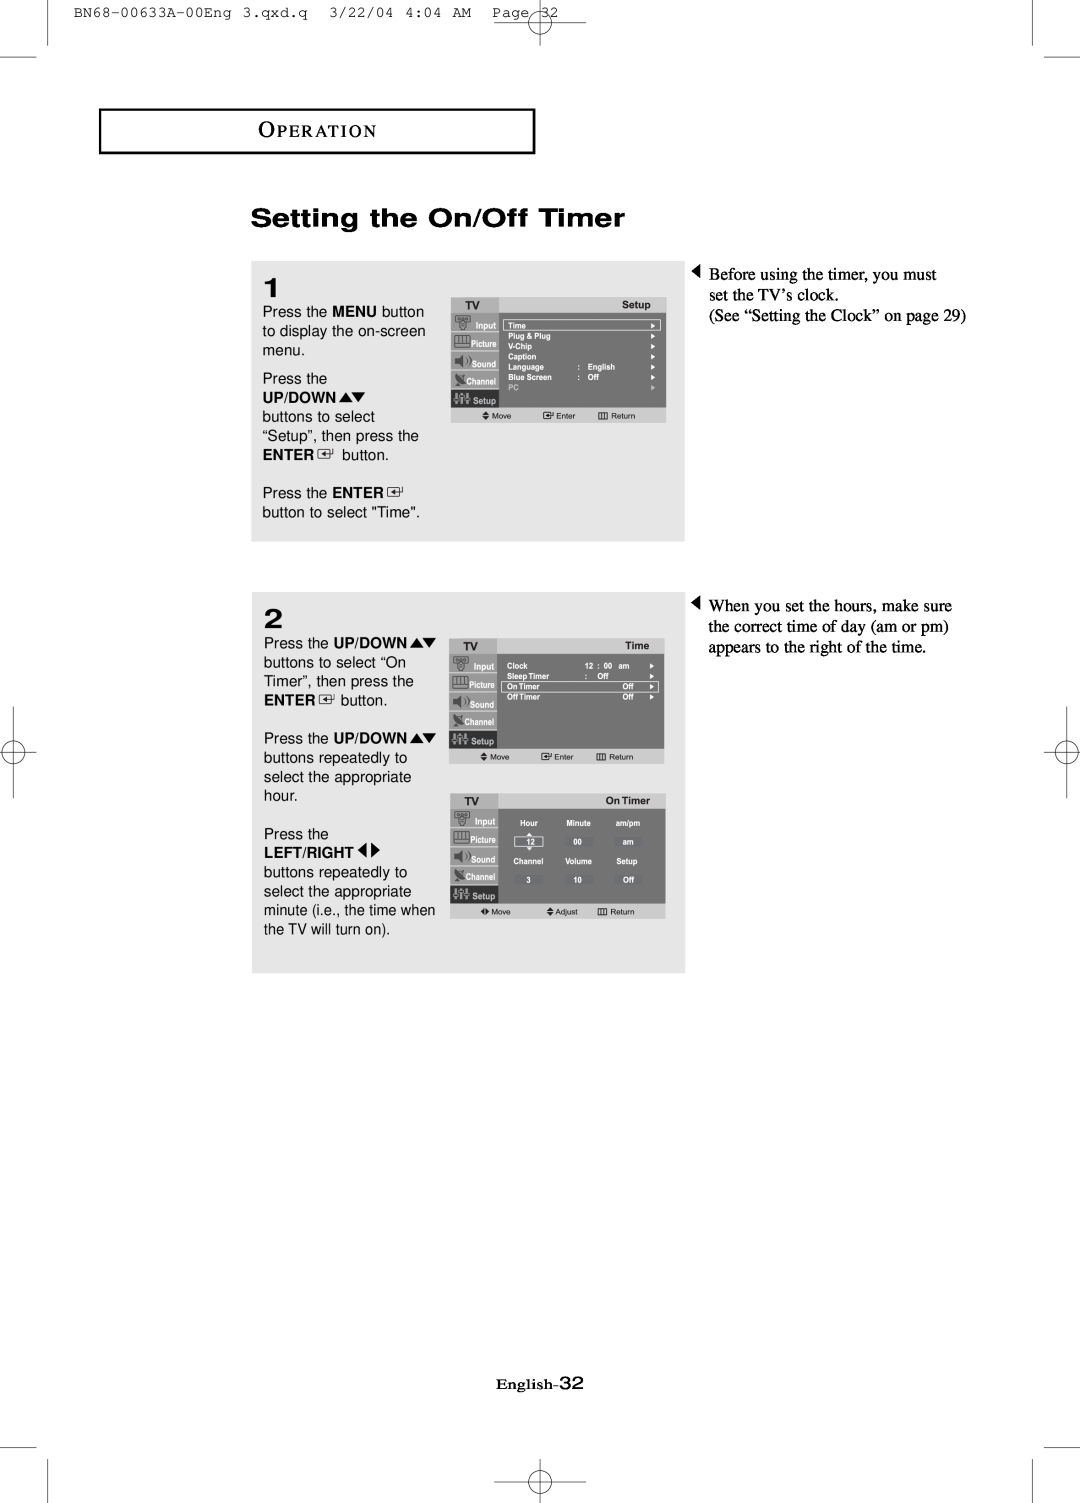 Samsung LT-P 2045 manual Setting the On/Off Timer, O P E R At I O N, Before using the timer, you must set the TV’s clock 